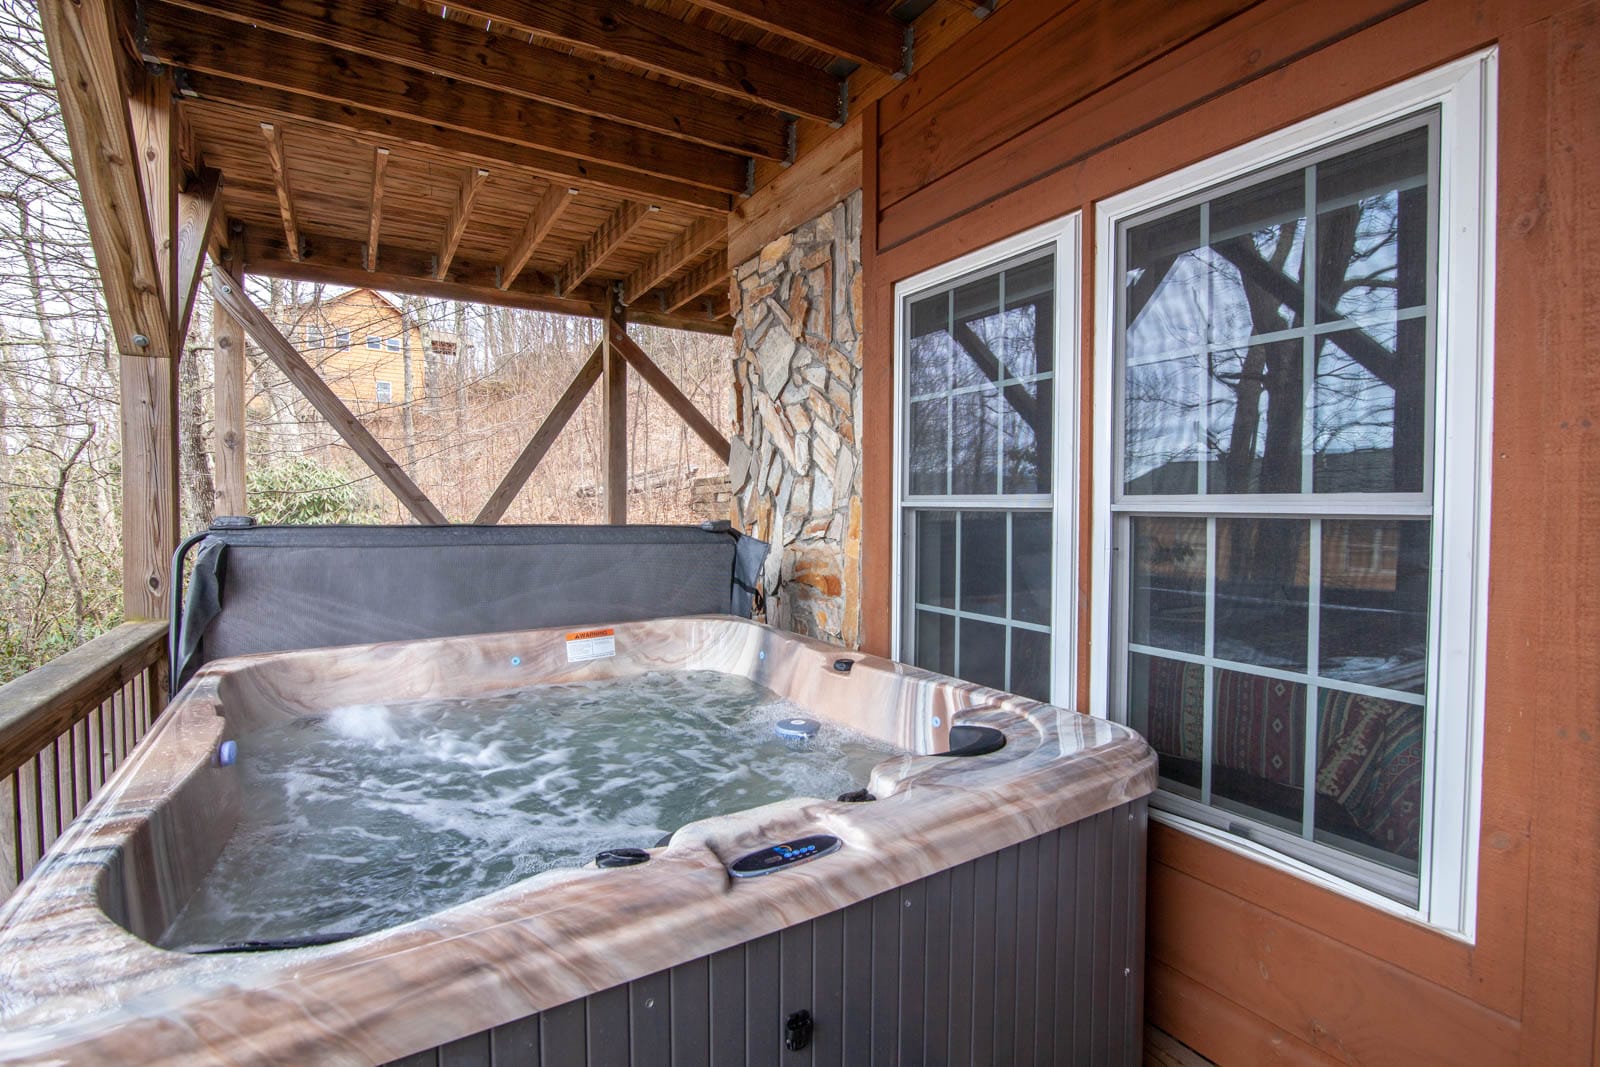 Soak in the Hot Tub on the Lower Deck